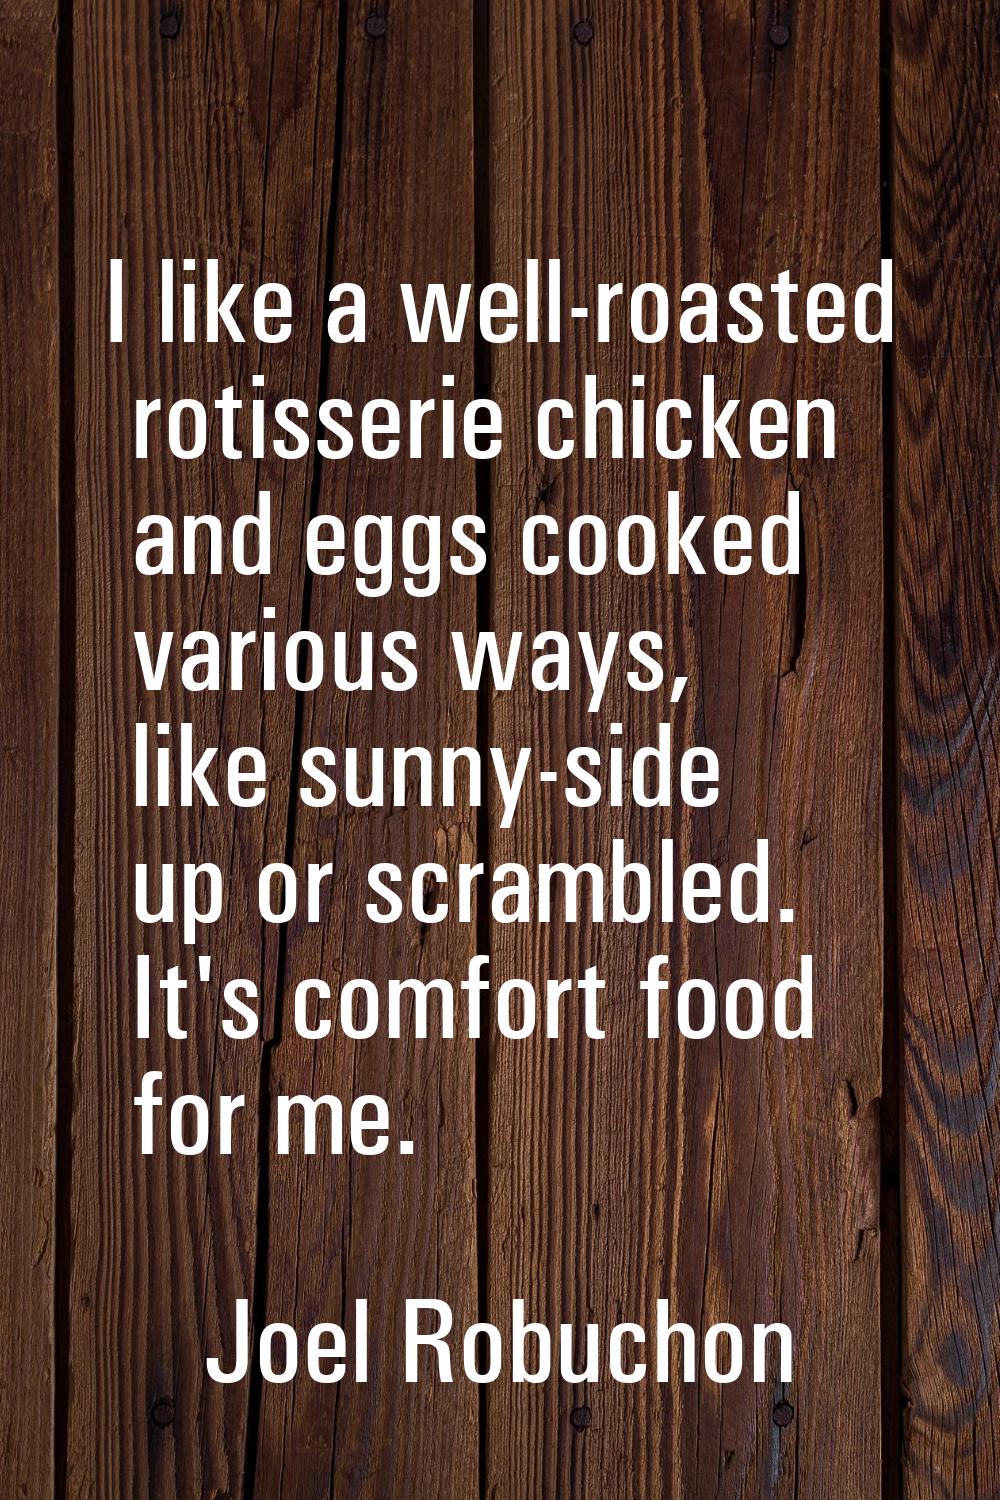 I like a well-roasted rotisserie chicken and eggs cooked various ways, like sunny-side up or scramb